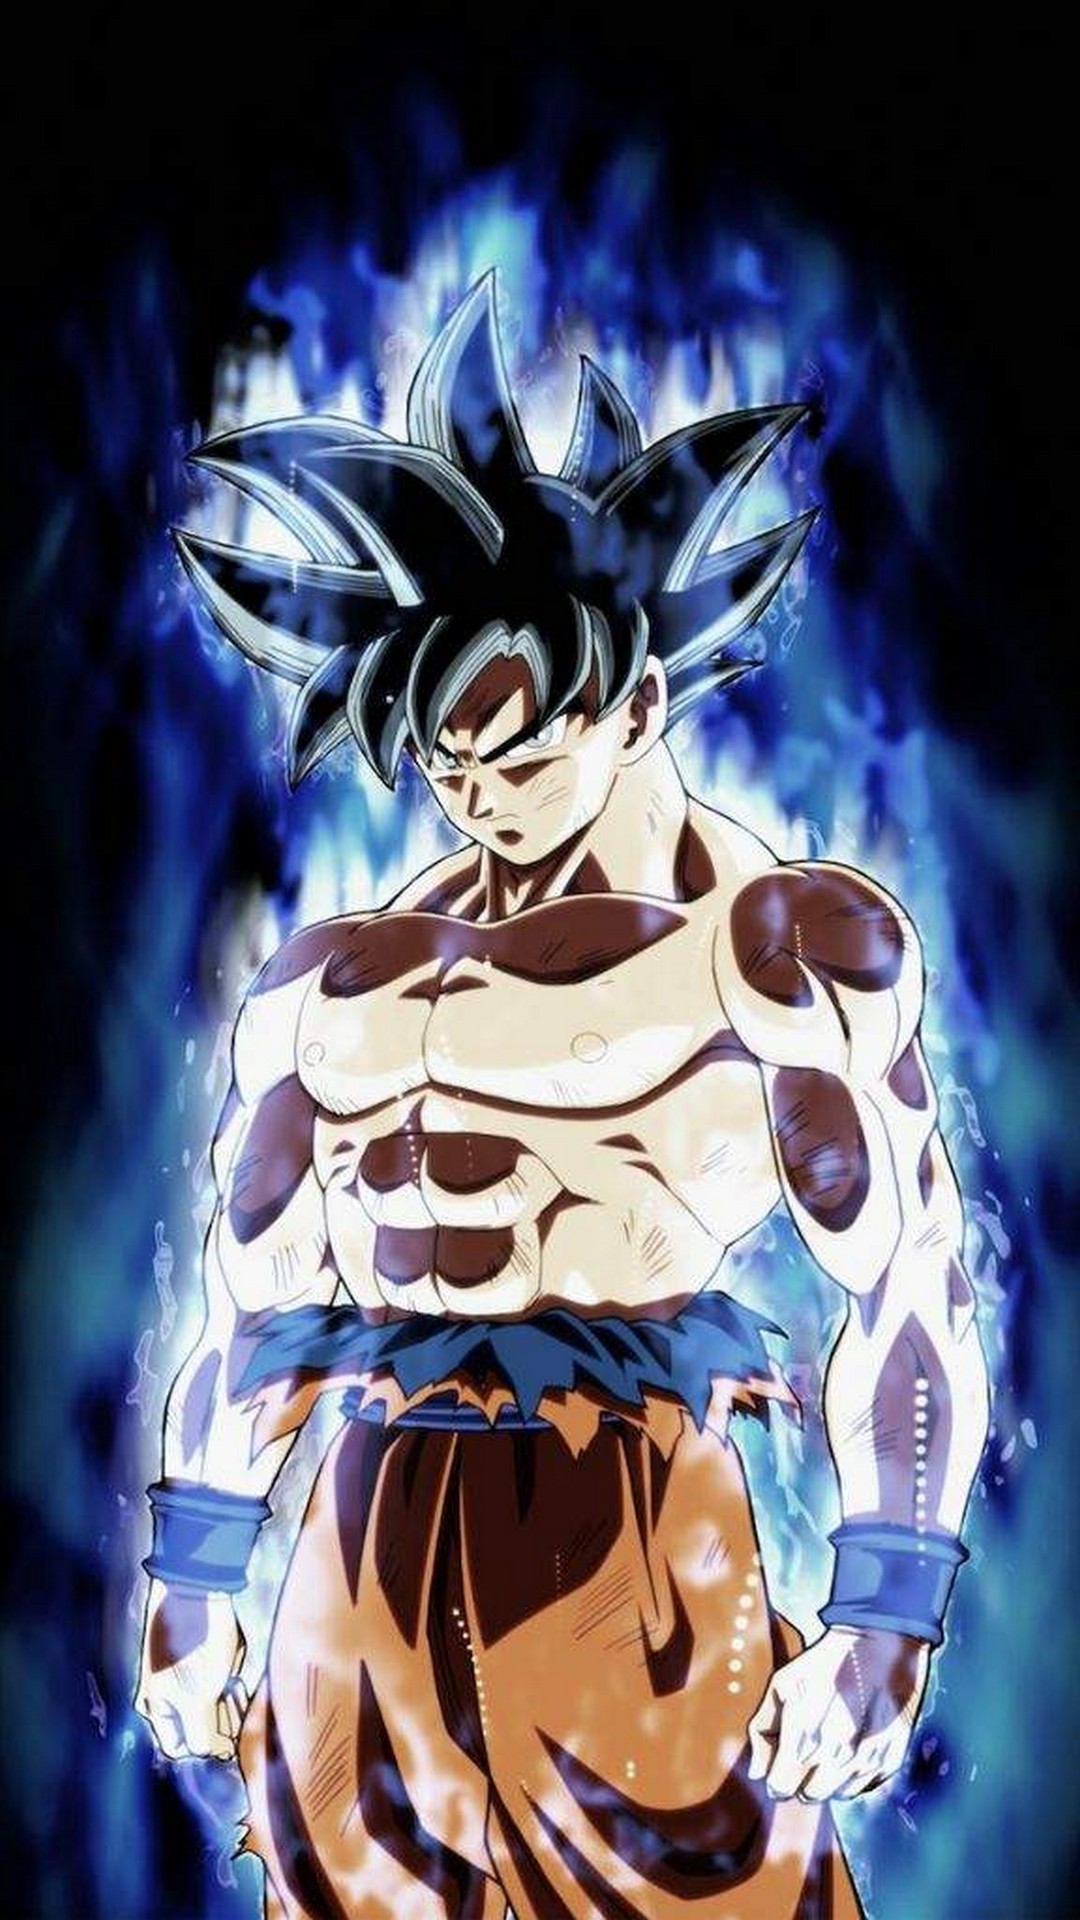 Wallpaper Goku Imagenes iPhone with image resolution 1080x1920 pixel. You can make this wallpaper for your iPhone 5, 6, 7, 8, X backgrounds, Mobile Screensaver, or iPad Lock Screen